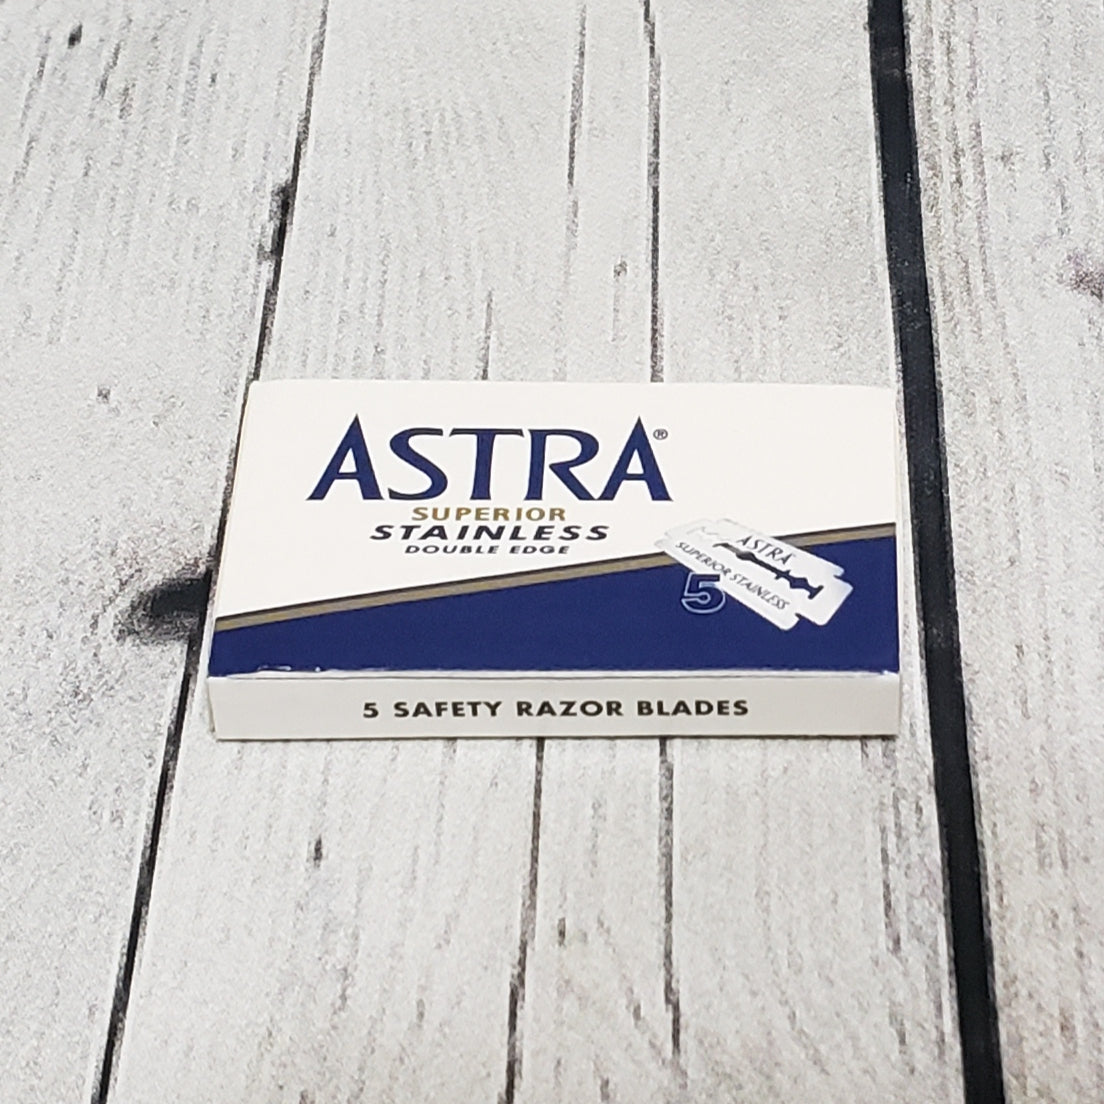 Astra Superior Stainless Double Edge Safety Razor Blades - 5 pack